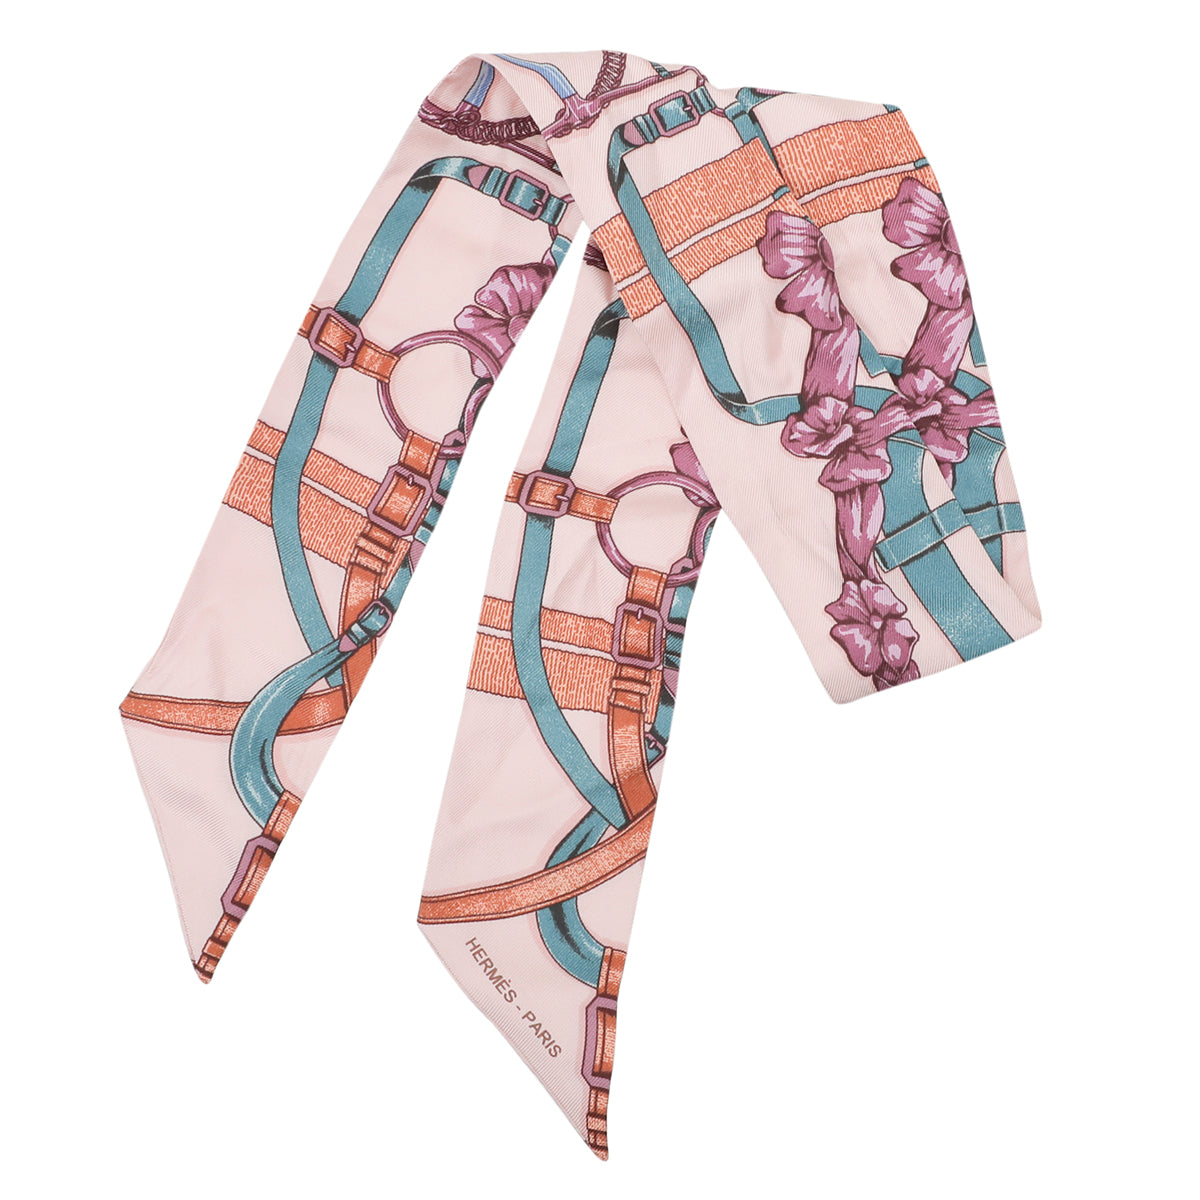 Hermes Light Peach Multicolor Braided Floral & Buckle Print Twilly Scarf